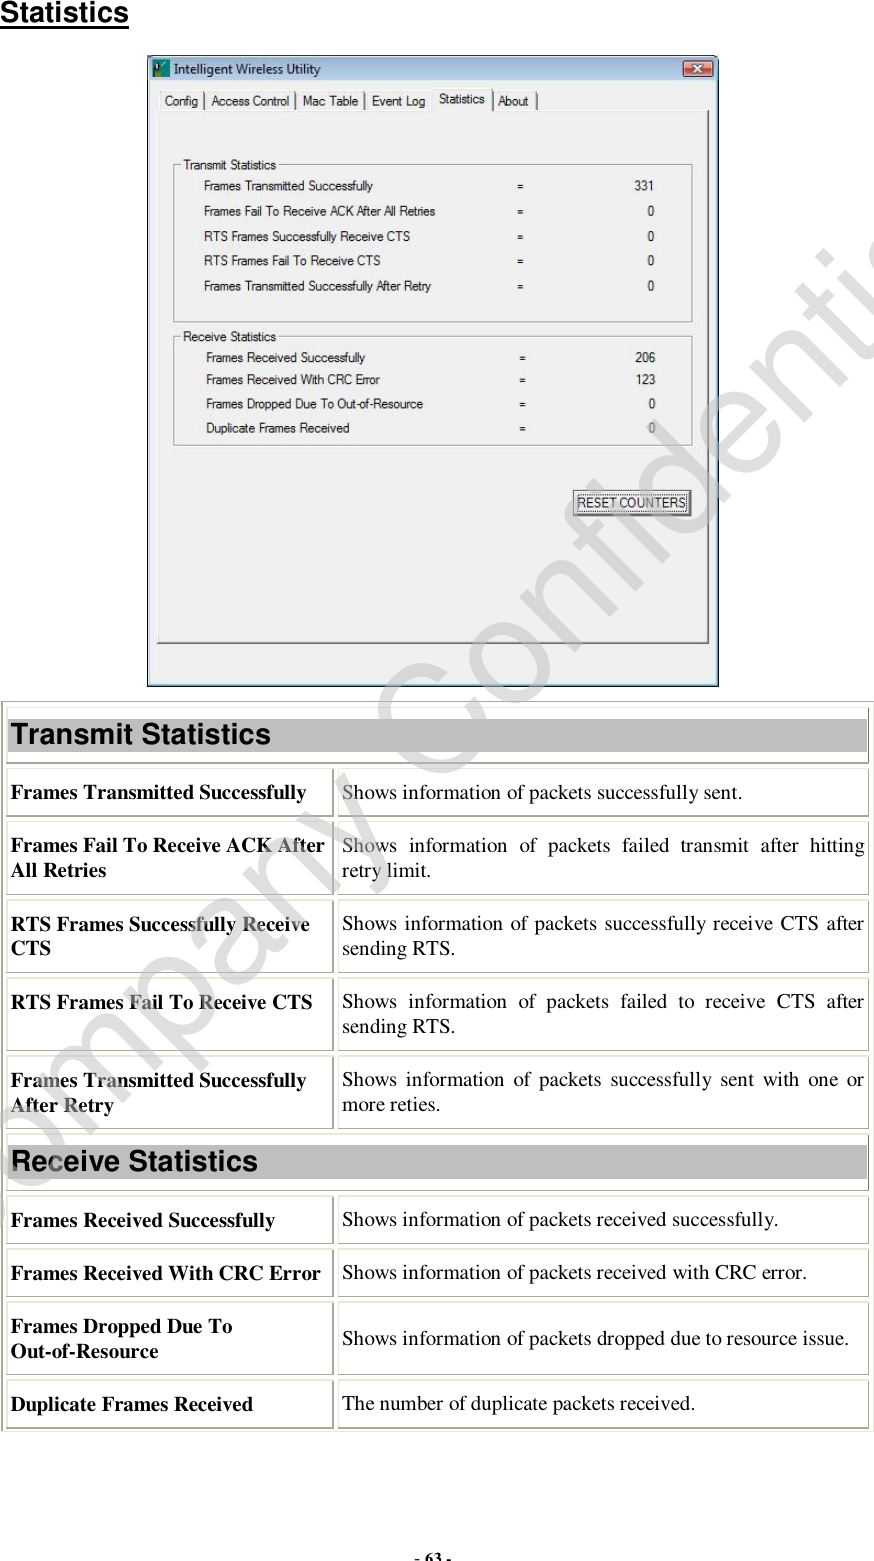  - 63 - Statistics  Transmit Statistics Frames Transmitted Successfully  Shows information of packets successfully sent. Frames Fail To Receive ACK After All Retries  Shows information of packets failed transmit after hitting retry limit. RTS Frames Successfully Receive CTS  Shows information of packets successfully receive CTS after sending RTS. RTS Frames Fail To Receive CTS  Shows information of packets failed to receive CTS after sending RTS. Frames Transmitted Successfully After Retry  Shows information of packets successfully sent with one or more reties. Receive Statistics Frames Received Successfully  Shows information of packets received successfully. Frames Received With CRC Error Shows information of packets received with CRC error. Frames Dropped Due To Out-of-Resource  Shows information of packets dropped due to resource issue. Duplicate Frames Received  The number of duplicate packets received. Company Confidential